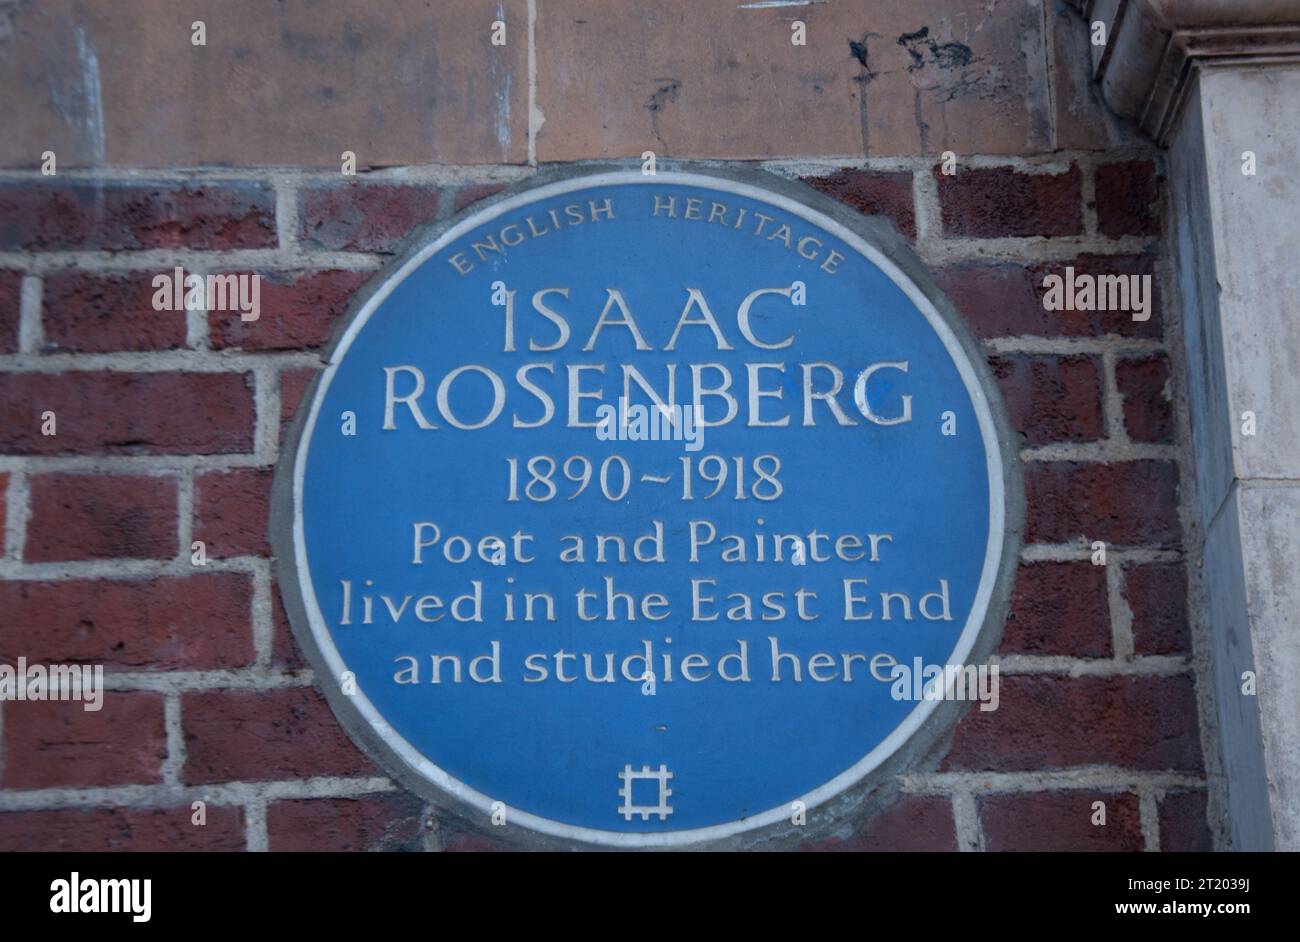 English Heritage Blue Plaque indicating that Isaac Rosenberg lived and studied in the East End of London, UK Stock Photo